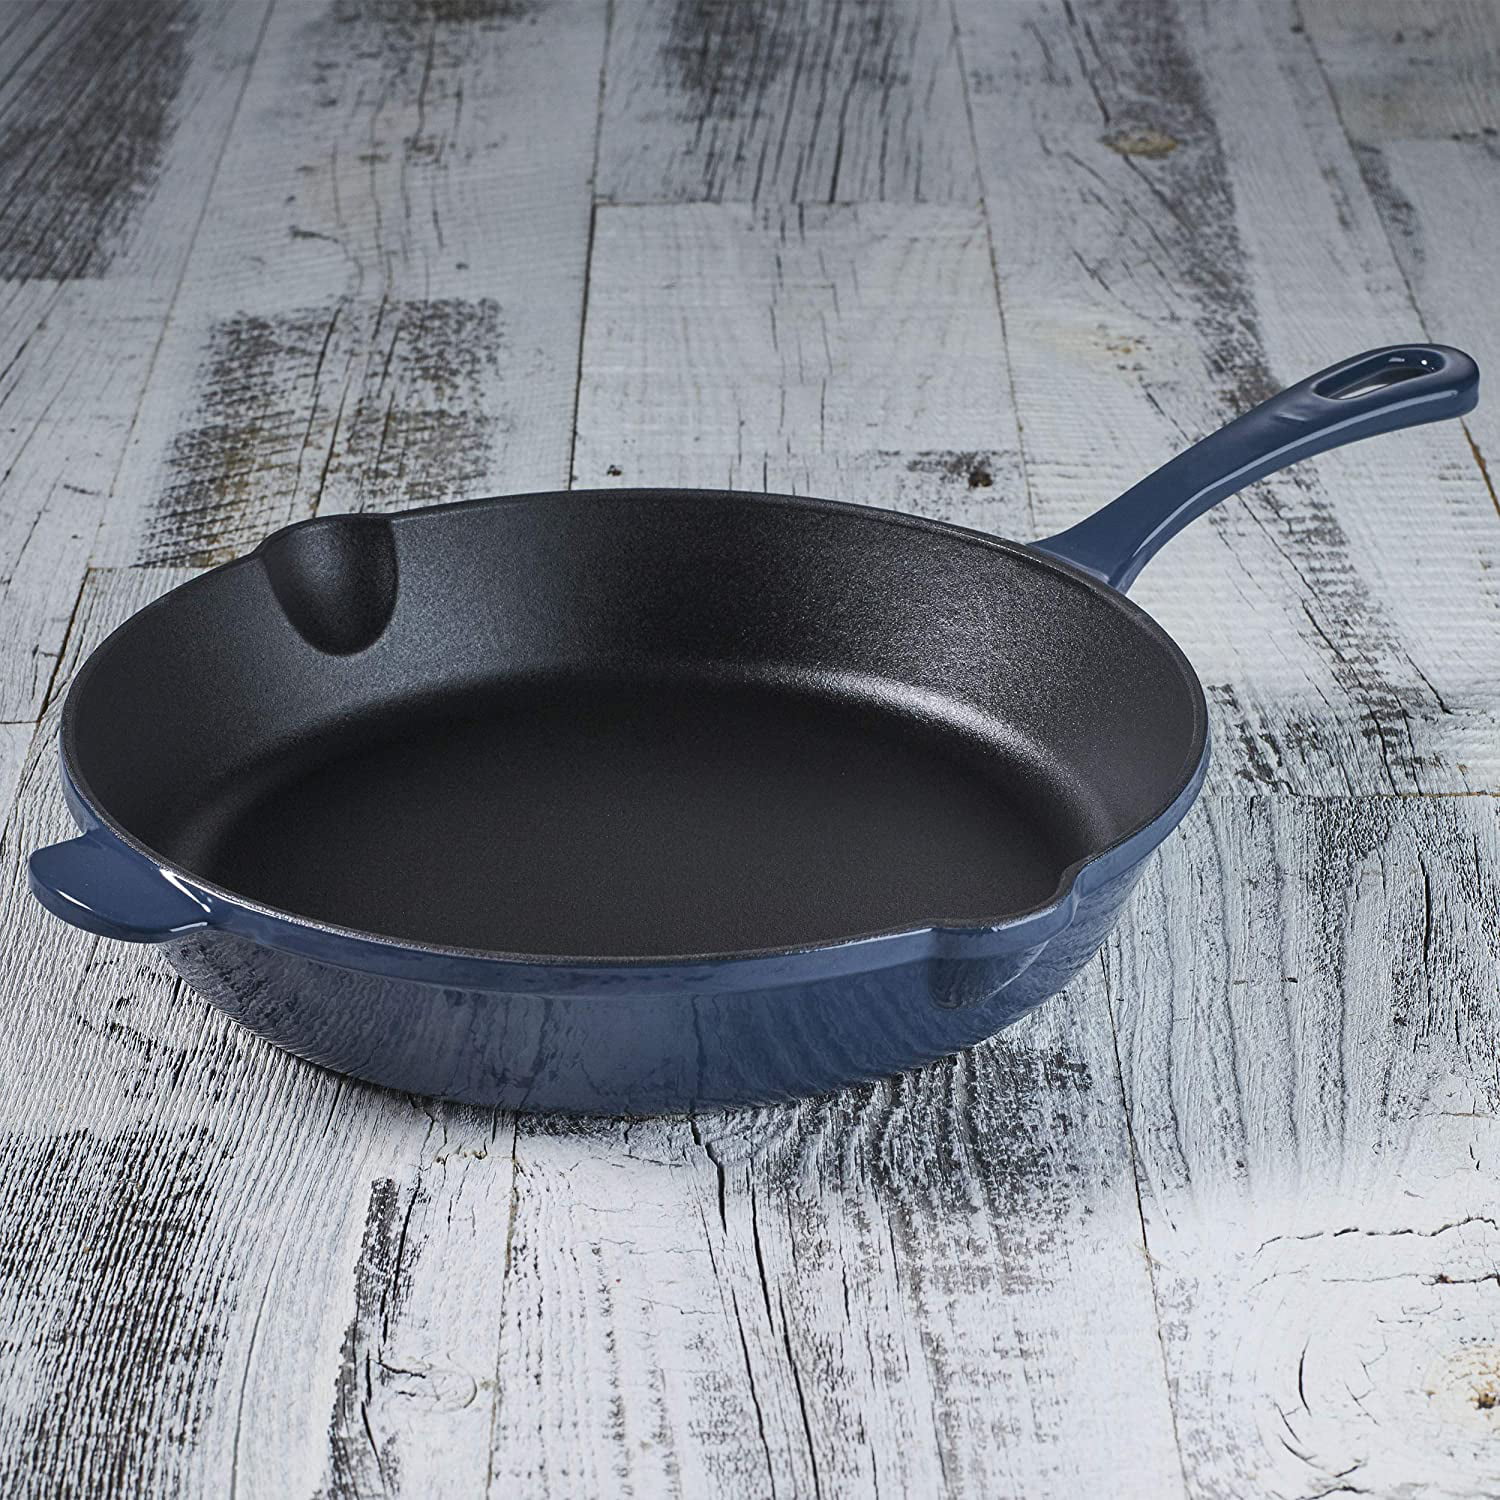 Cuisinart Cast Iron Skillets Are 70% Off on  Today